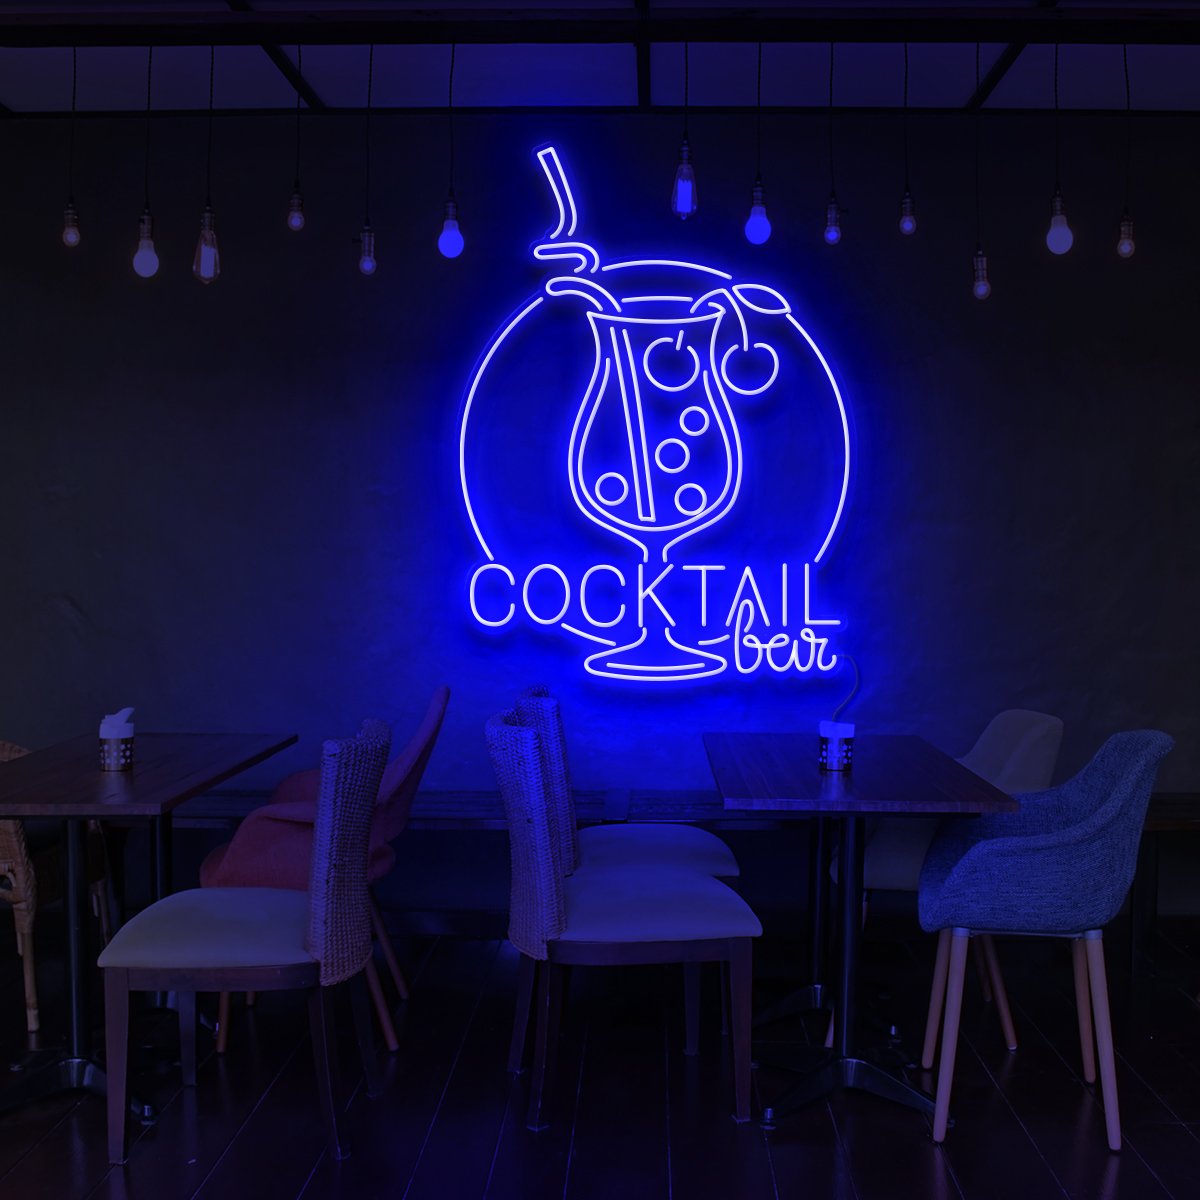 "Cocktail Bar" Neon Sign for Bars & Restaurants 90cm (3ft) / Blue / LED Neon by Neon Icons